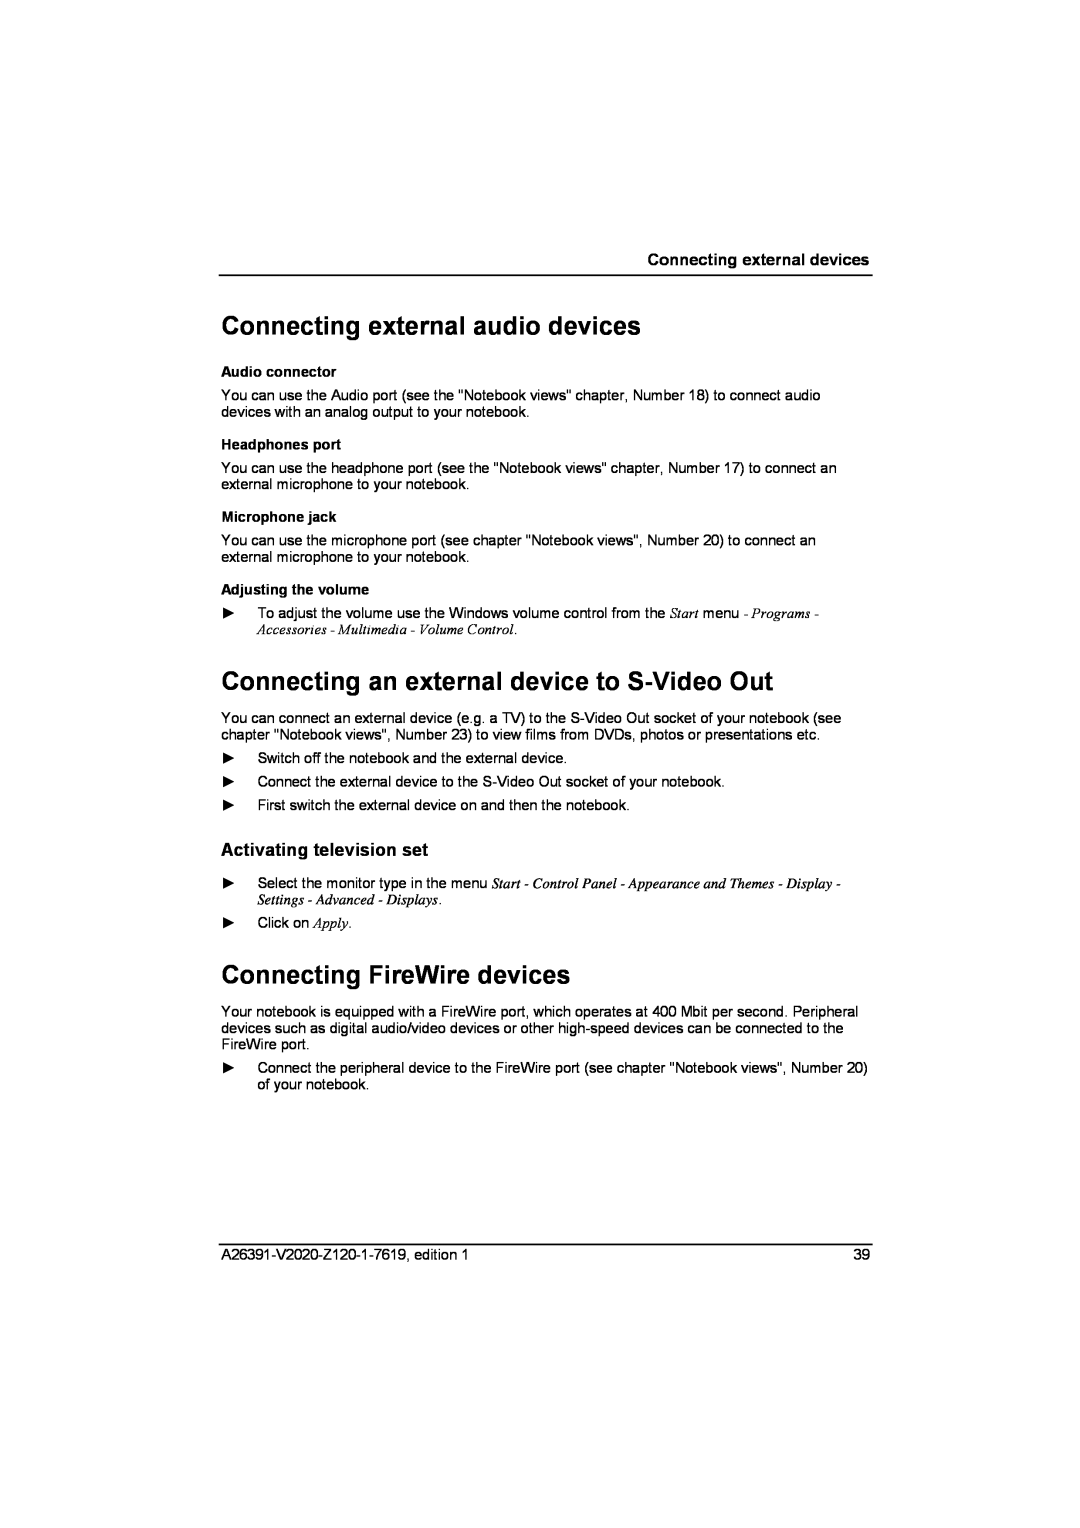 Fujitsu Siemens Computers V2020 manual Connecting external audio devices, Connecting an external device to S-Video Out 